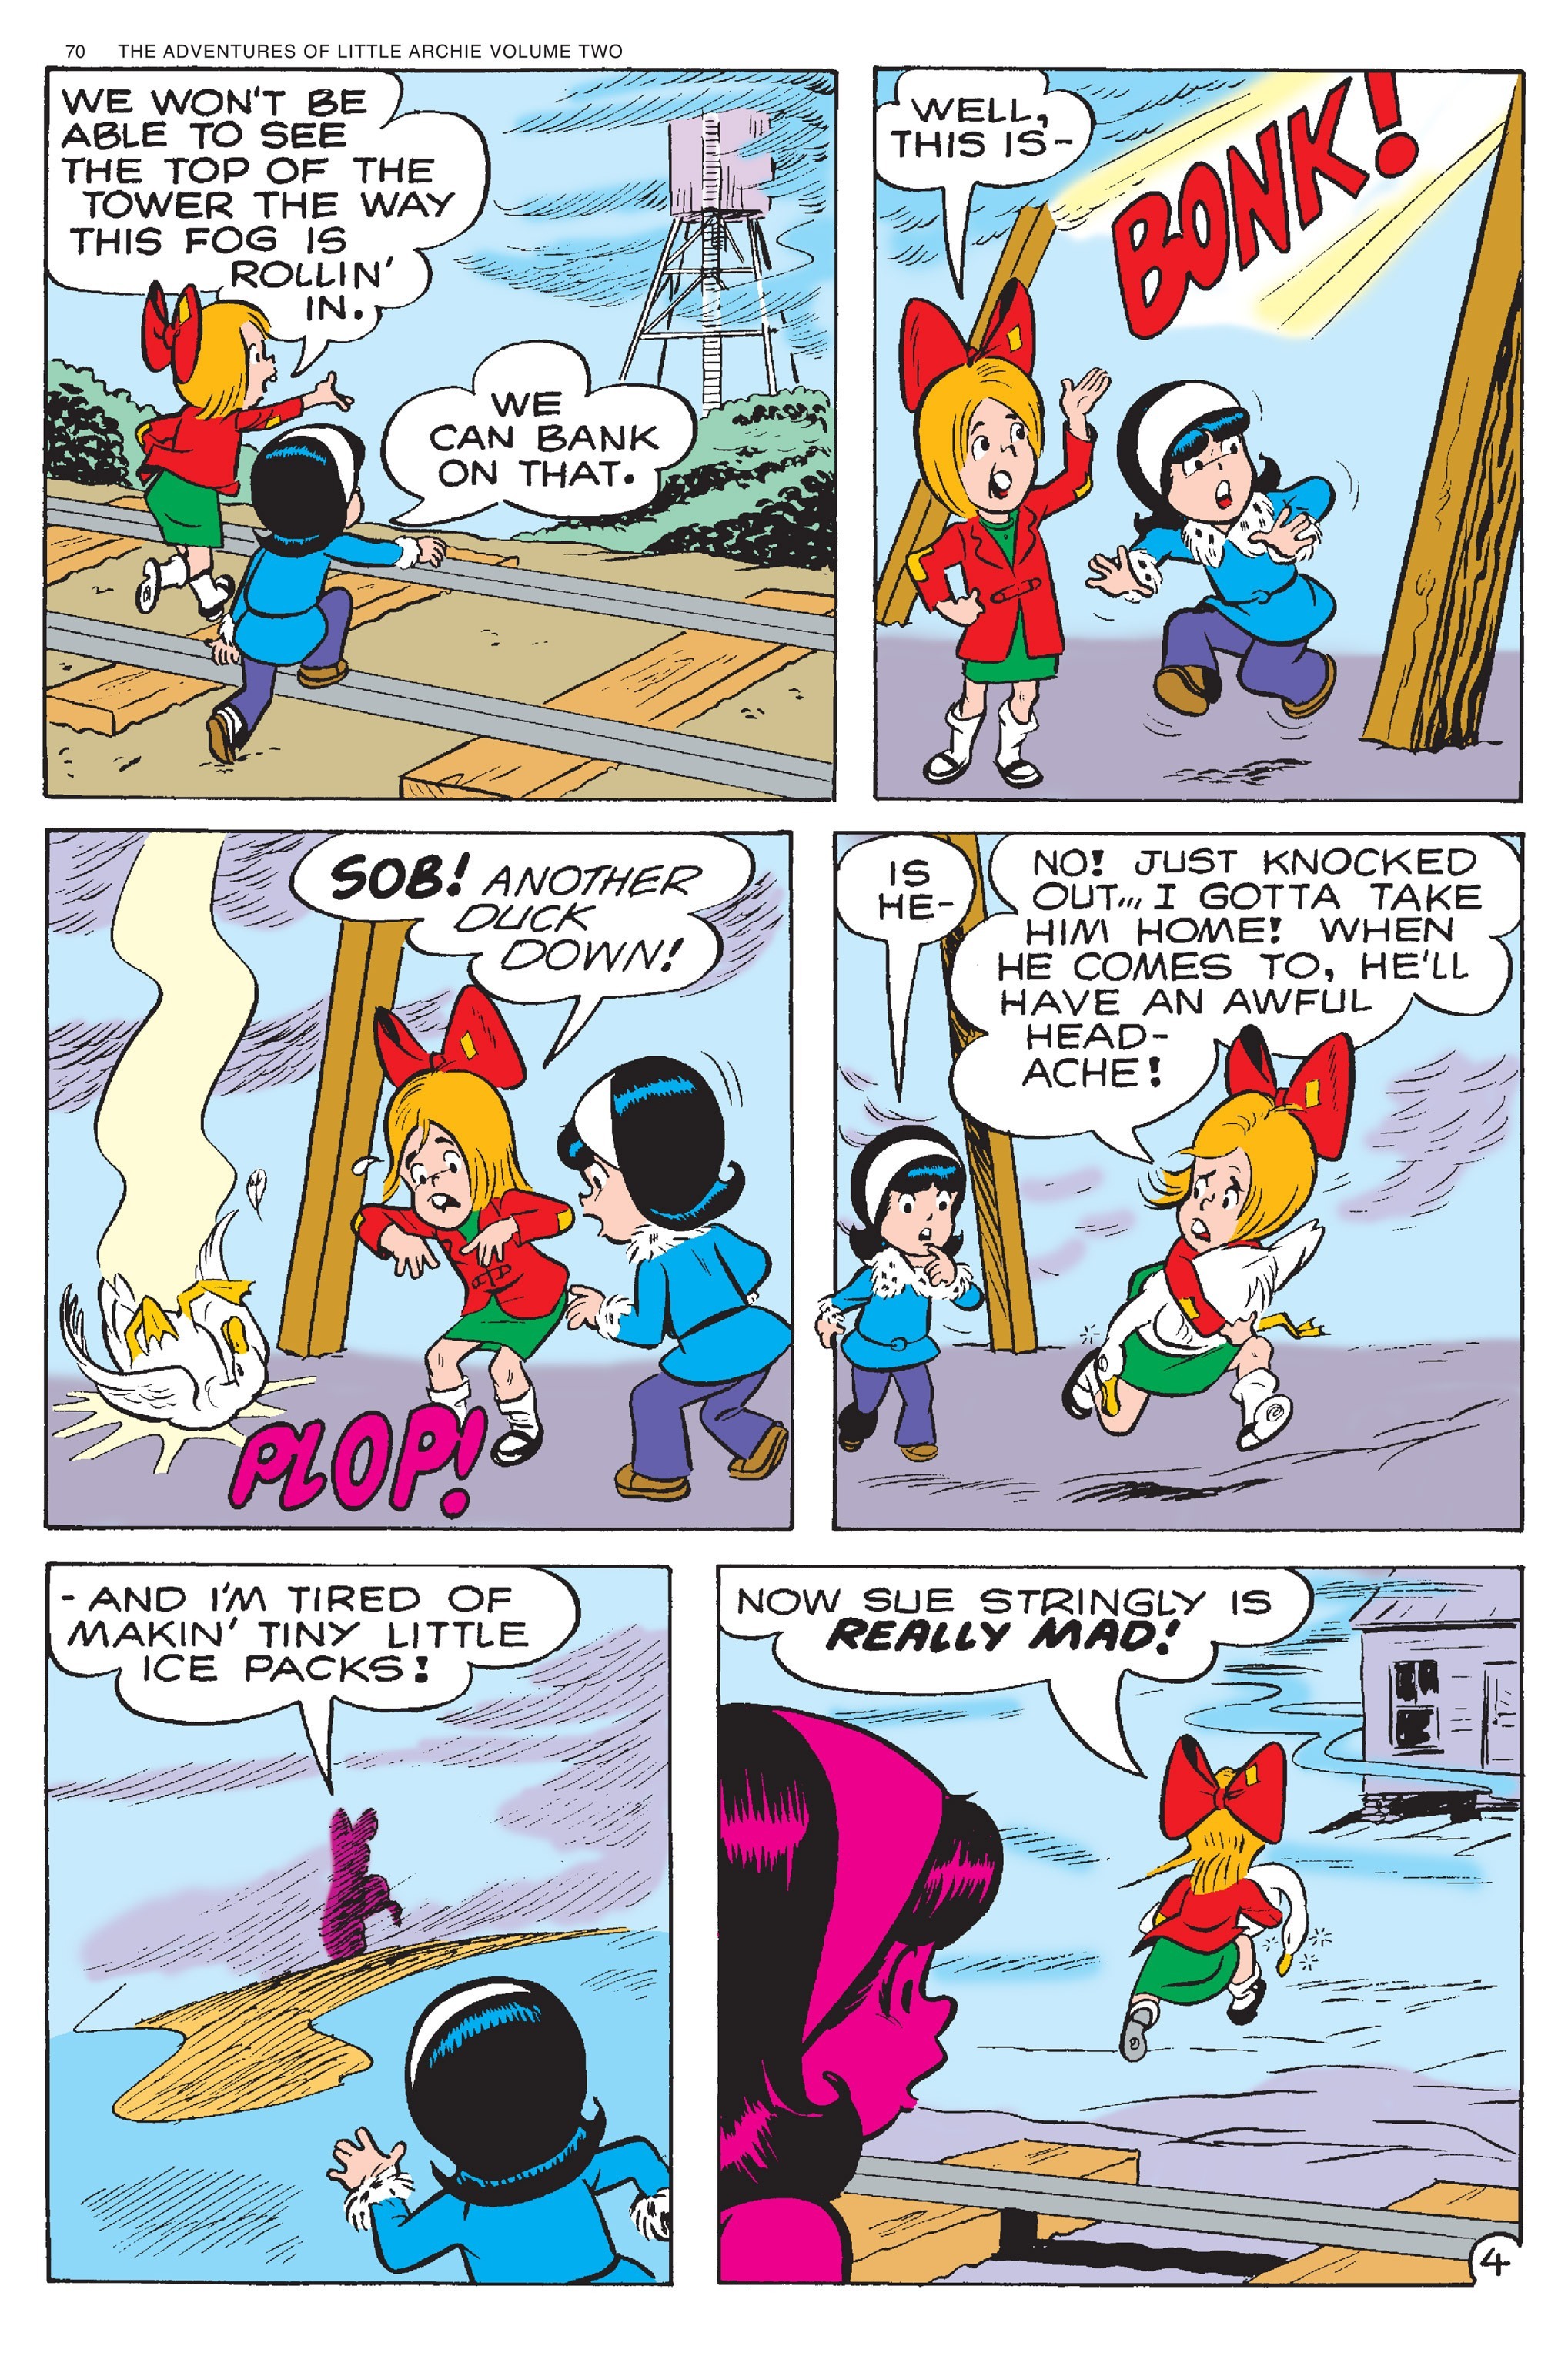 Read online Adventures of Little Archie comic -  Issue # TPB 2 - 71